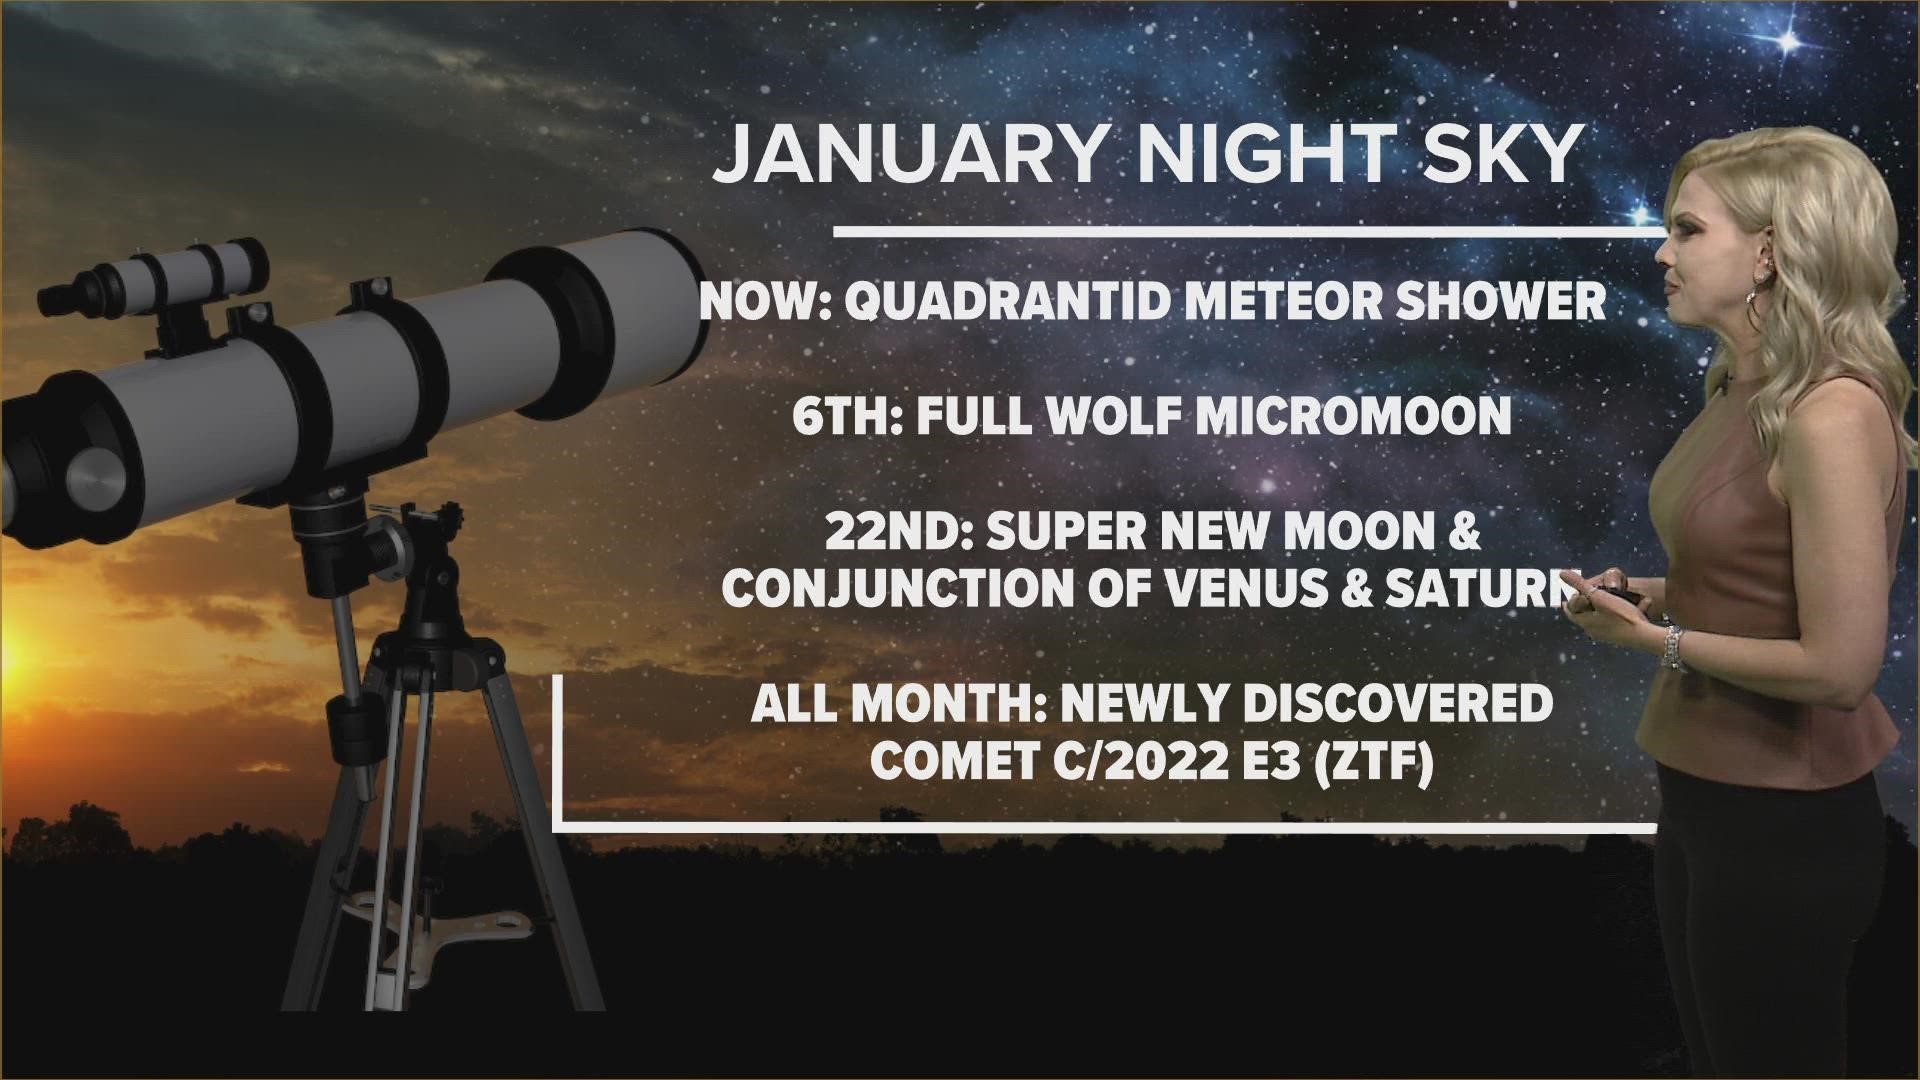 There are plenty of events to check out in the January night skies. Krystle Henderson has the details.